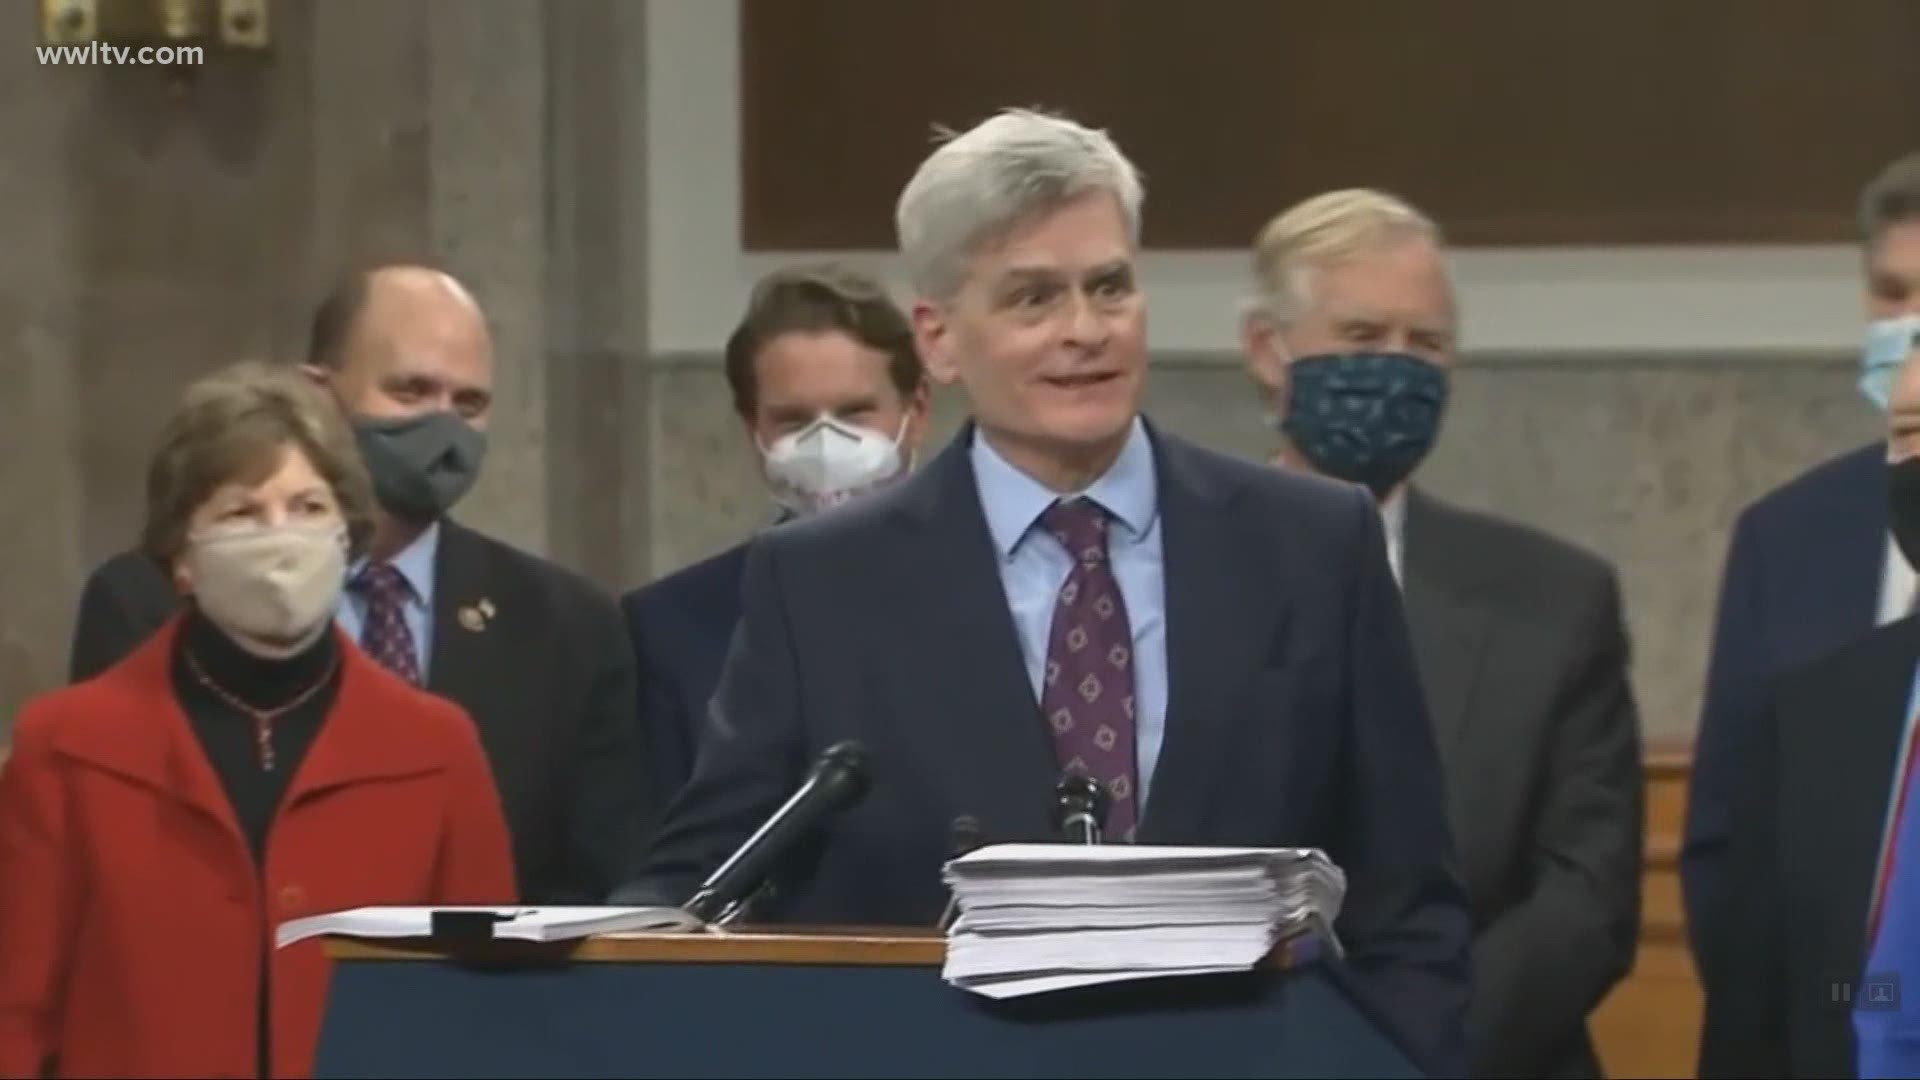 Sen. Cassidy says republicans won’t agree to aid for cities and states unless democrats agree to coronavirus lawsuit protections for businesses and other entities.